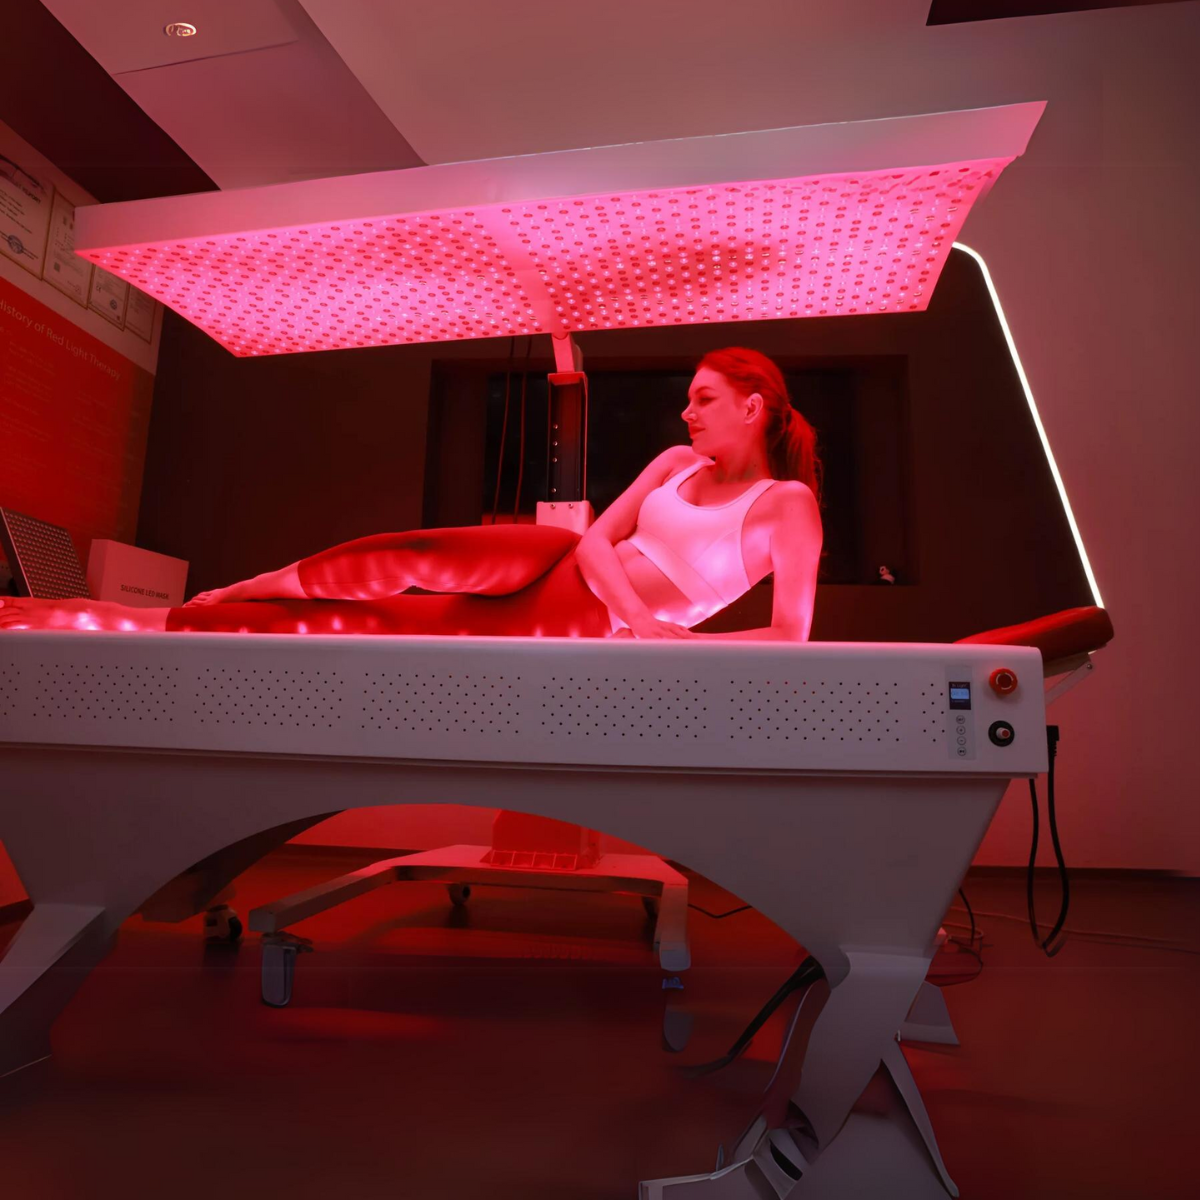 Viva Pro Red Light & NIR Portable Therapy Bed